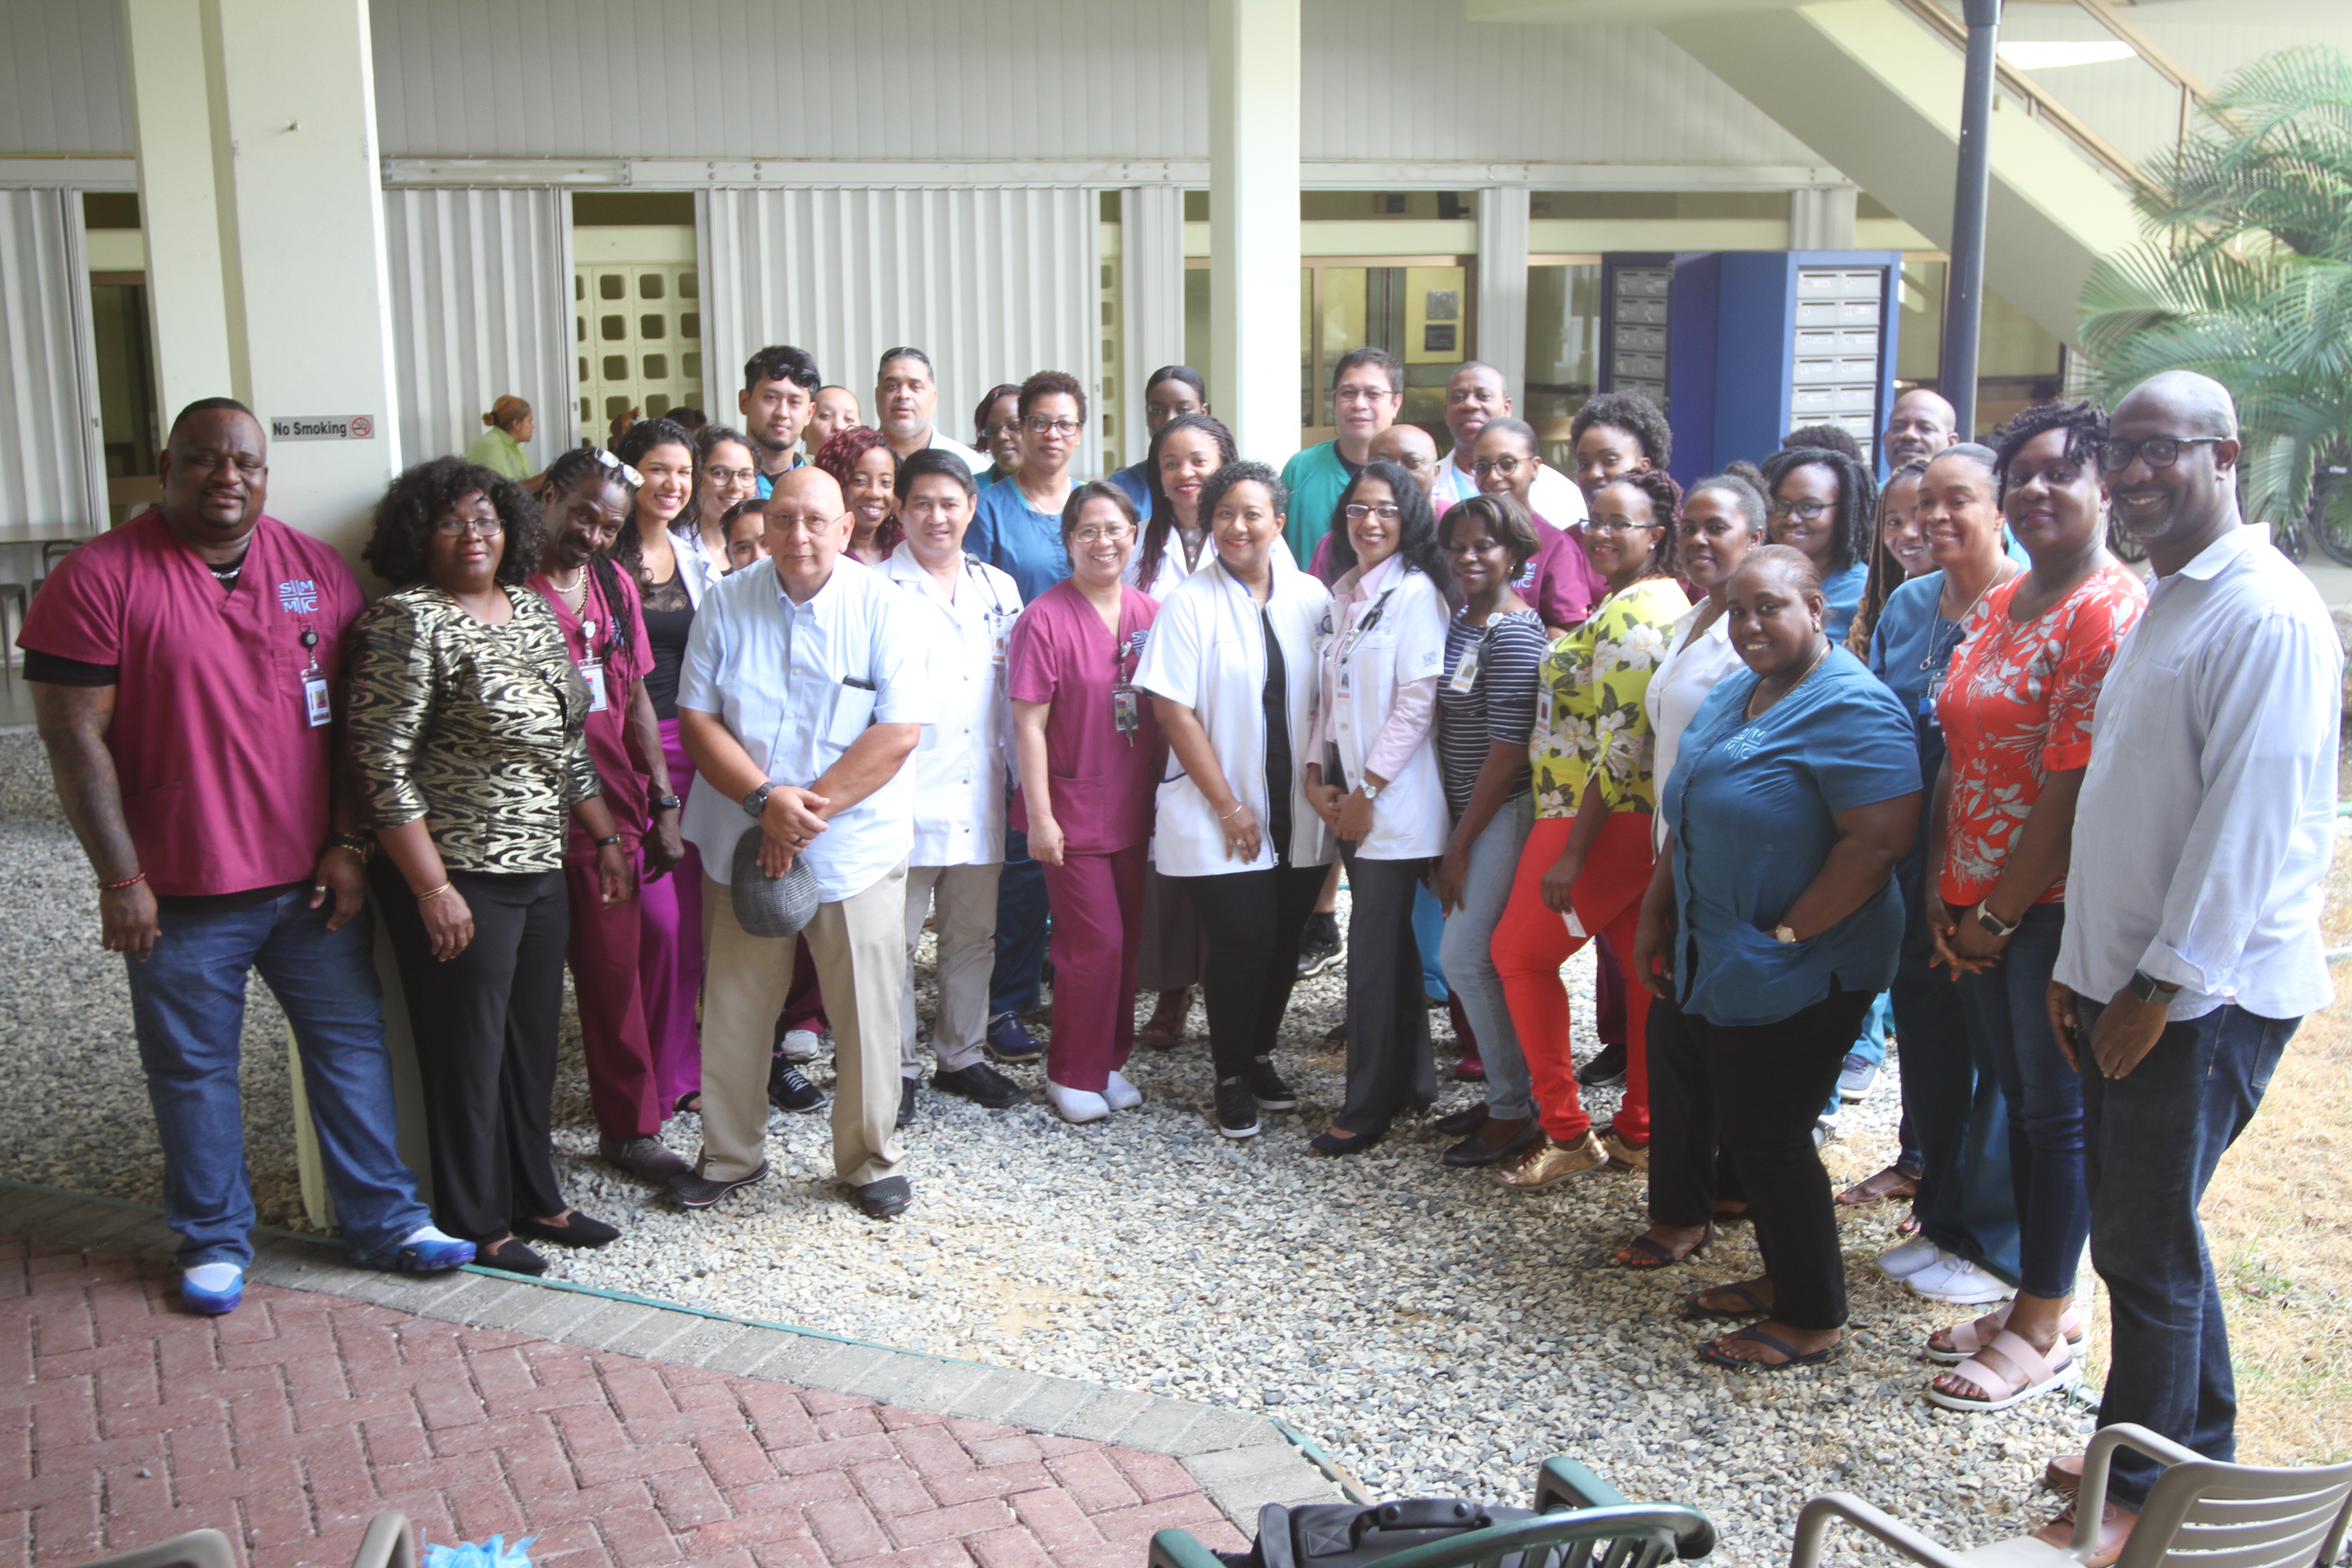 Advanced Cardiac Life Support course held at SMMC